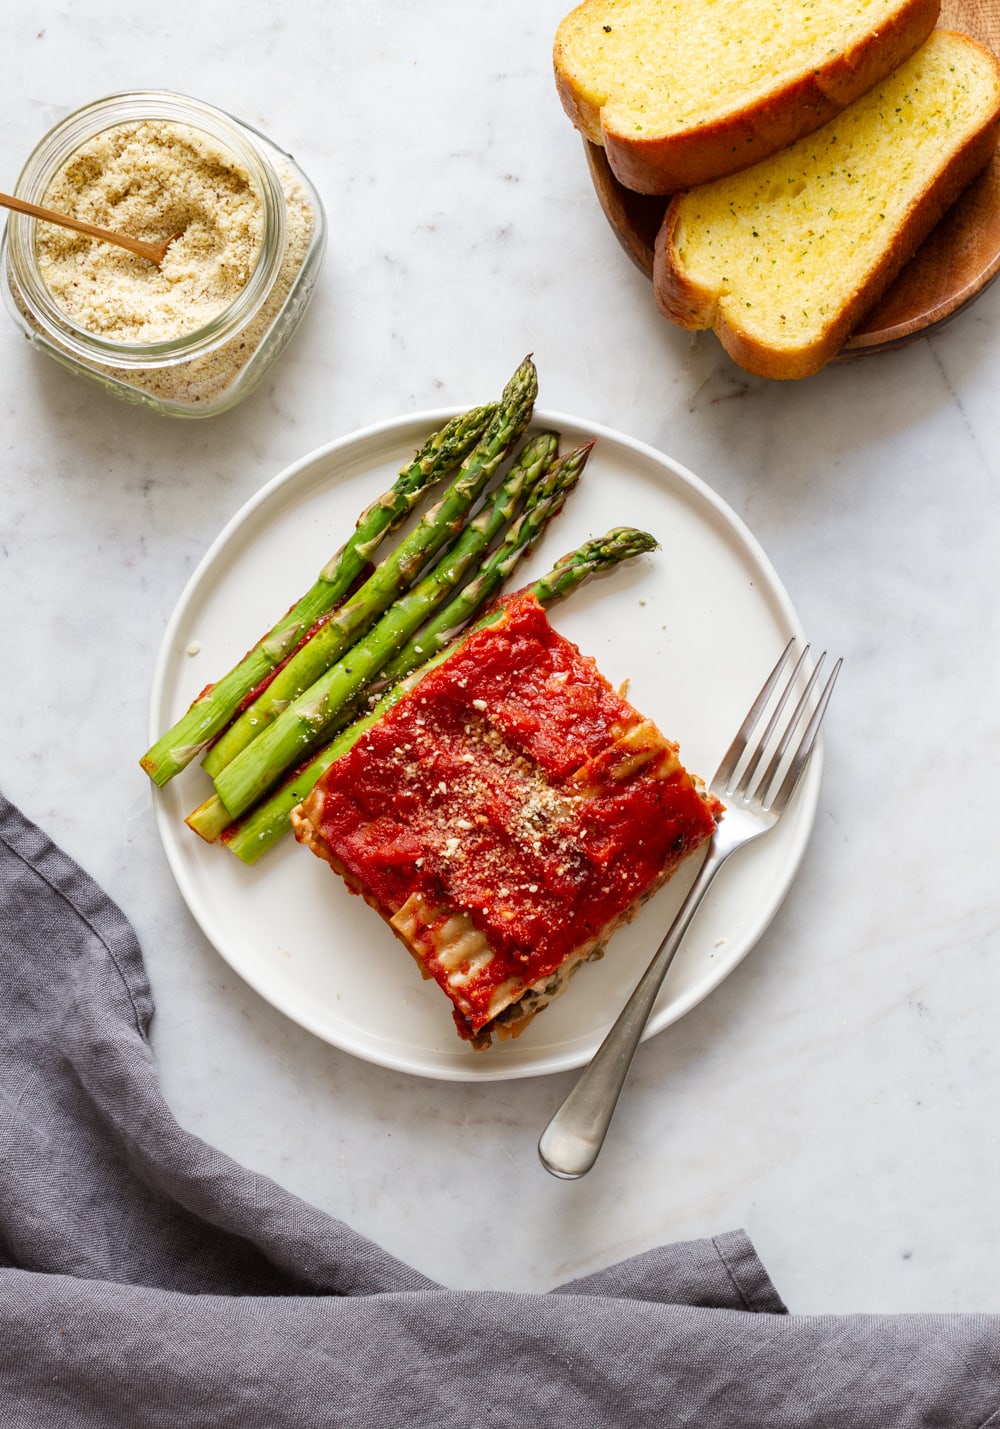 top down view of a plate with a slice of simple vegan lasagna and asparagus, with almond parmesan and bread on the side